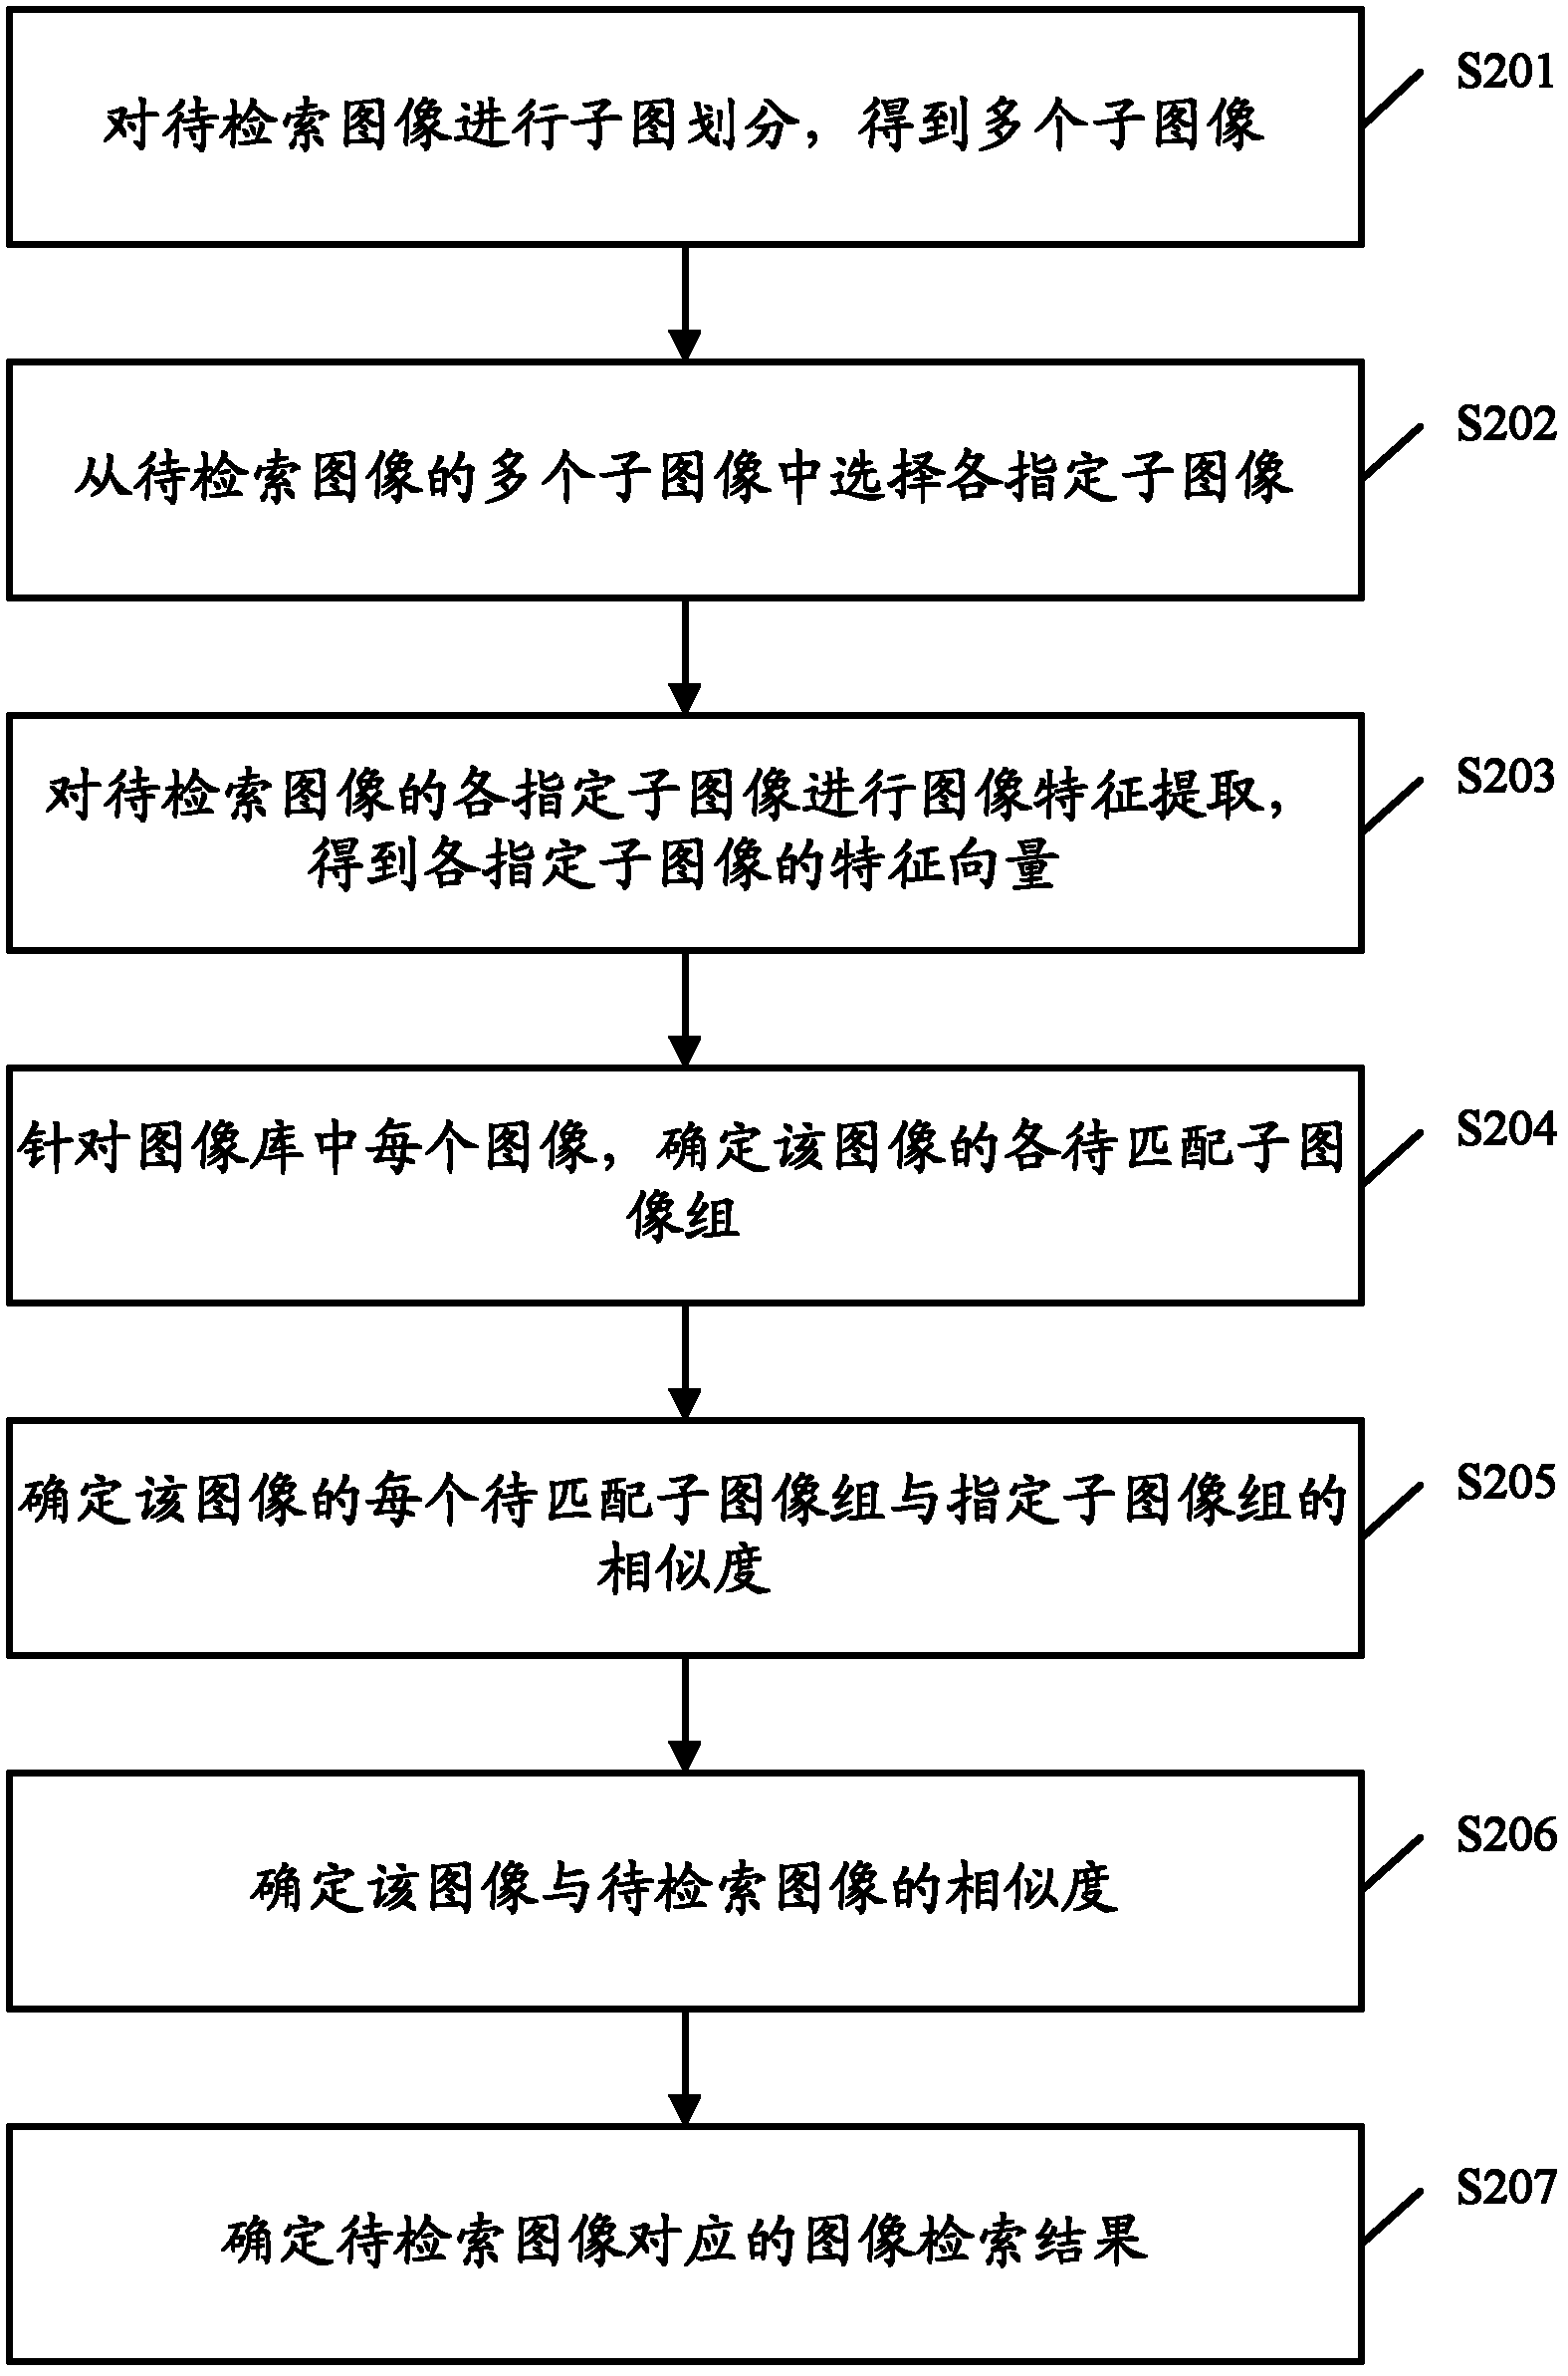 Image retrieving method and device